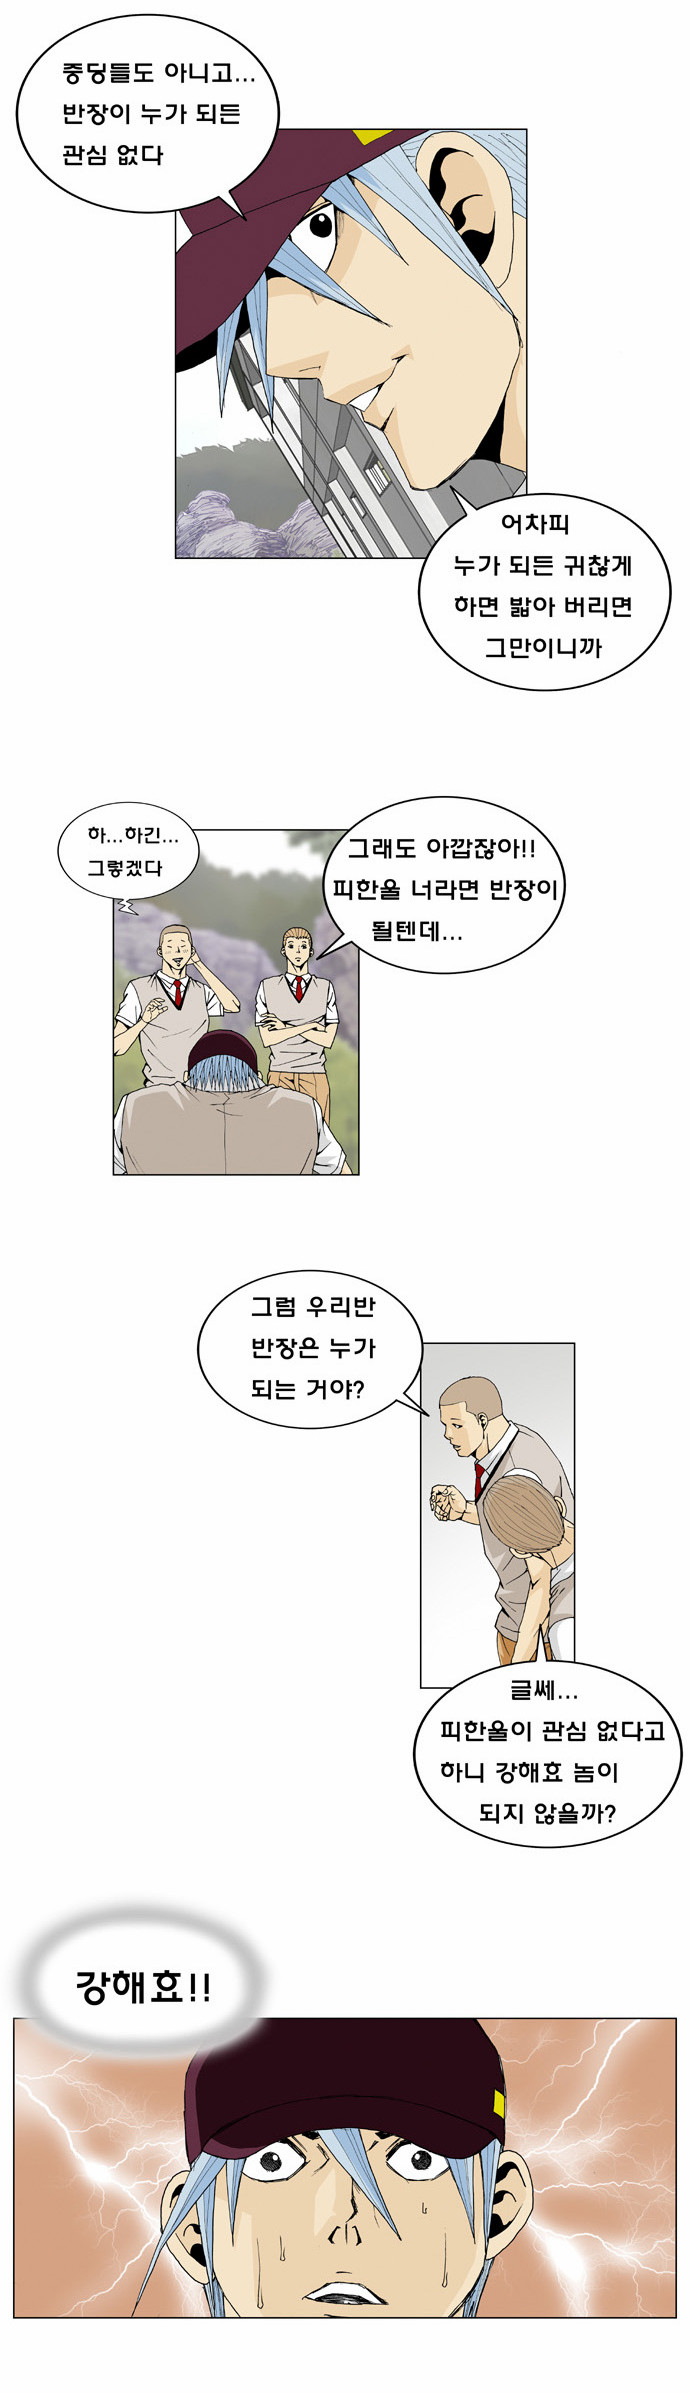 Ultimate Legend - Kang Hae Hyo - Chapter 5 - Page 4